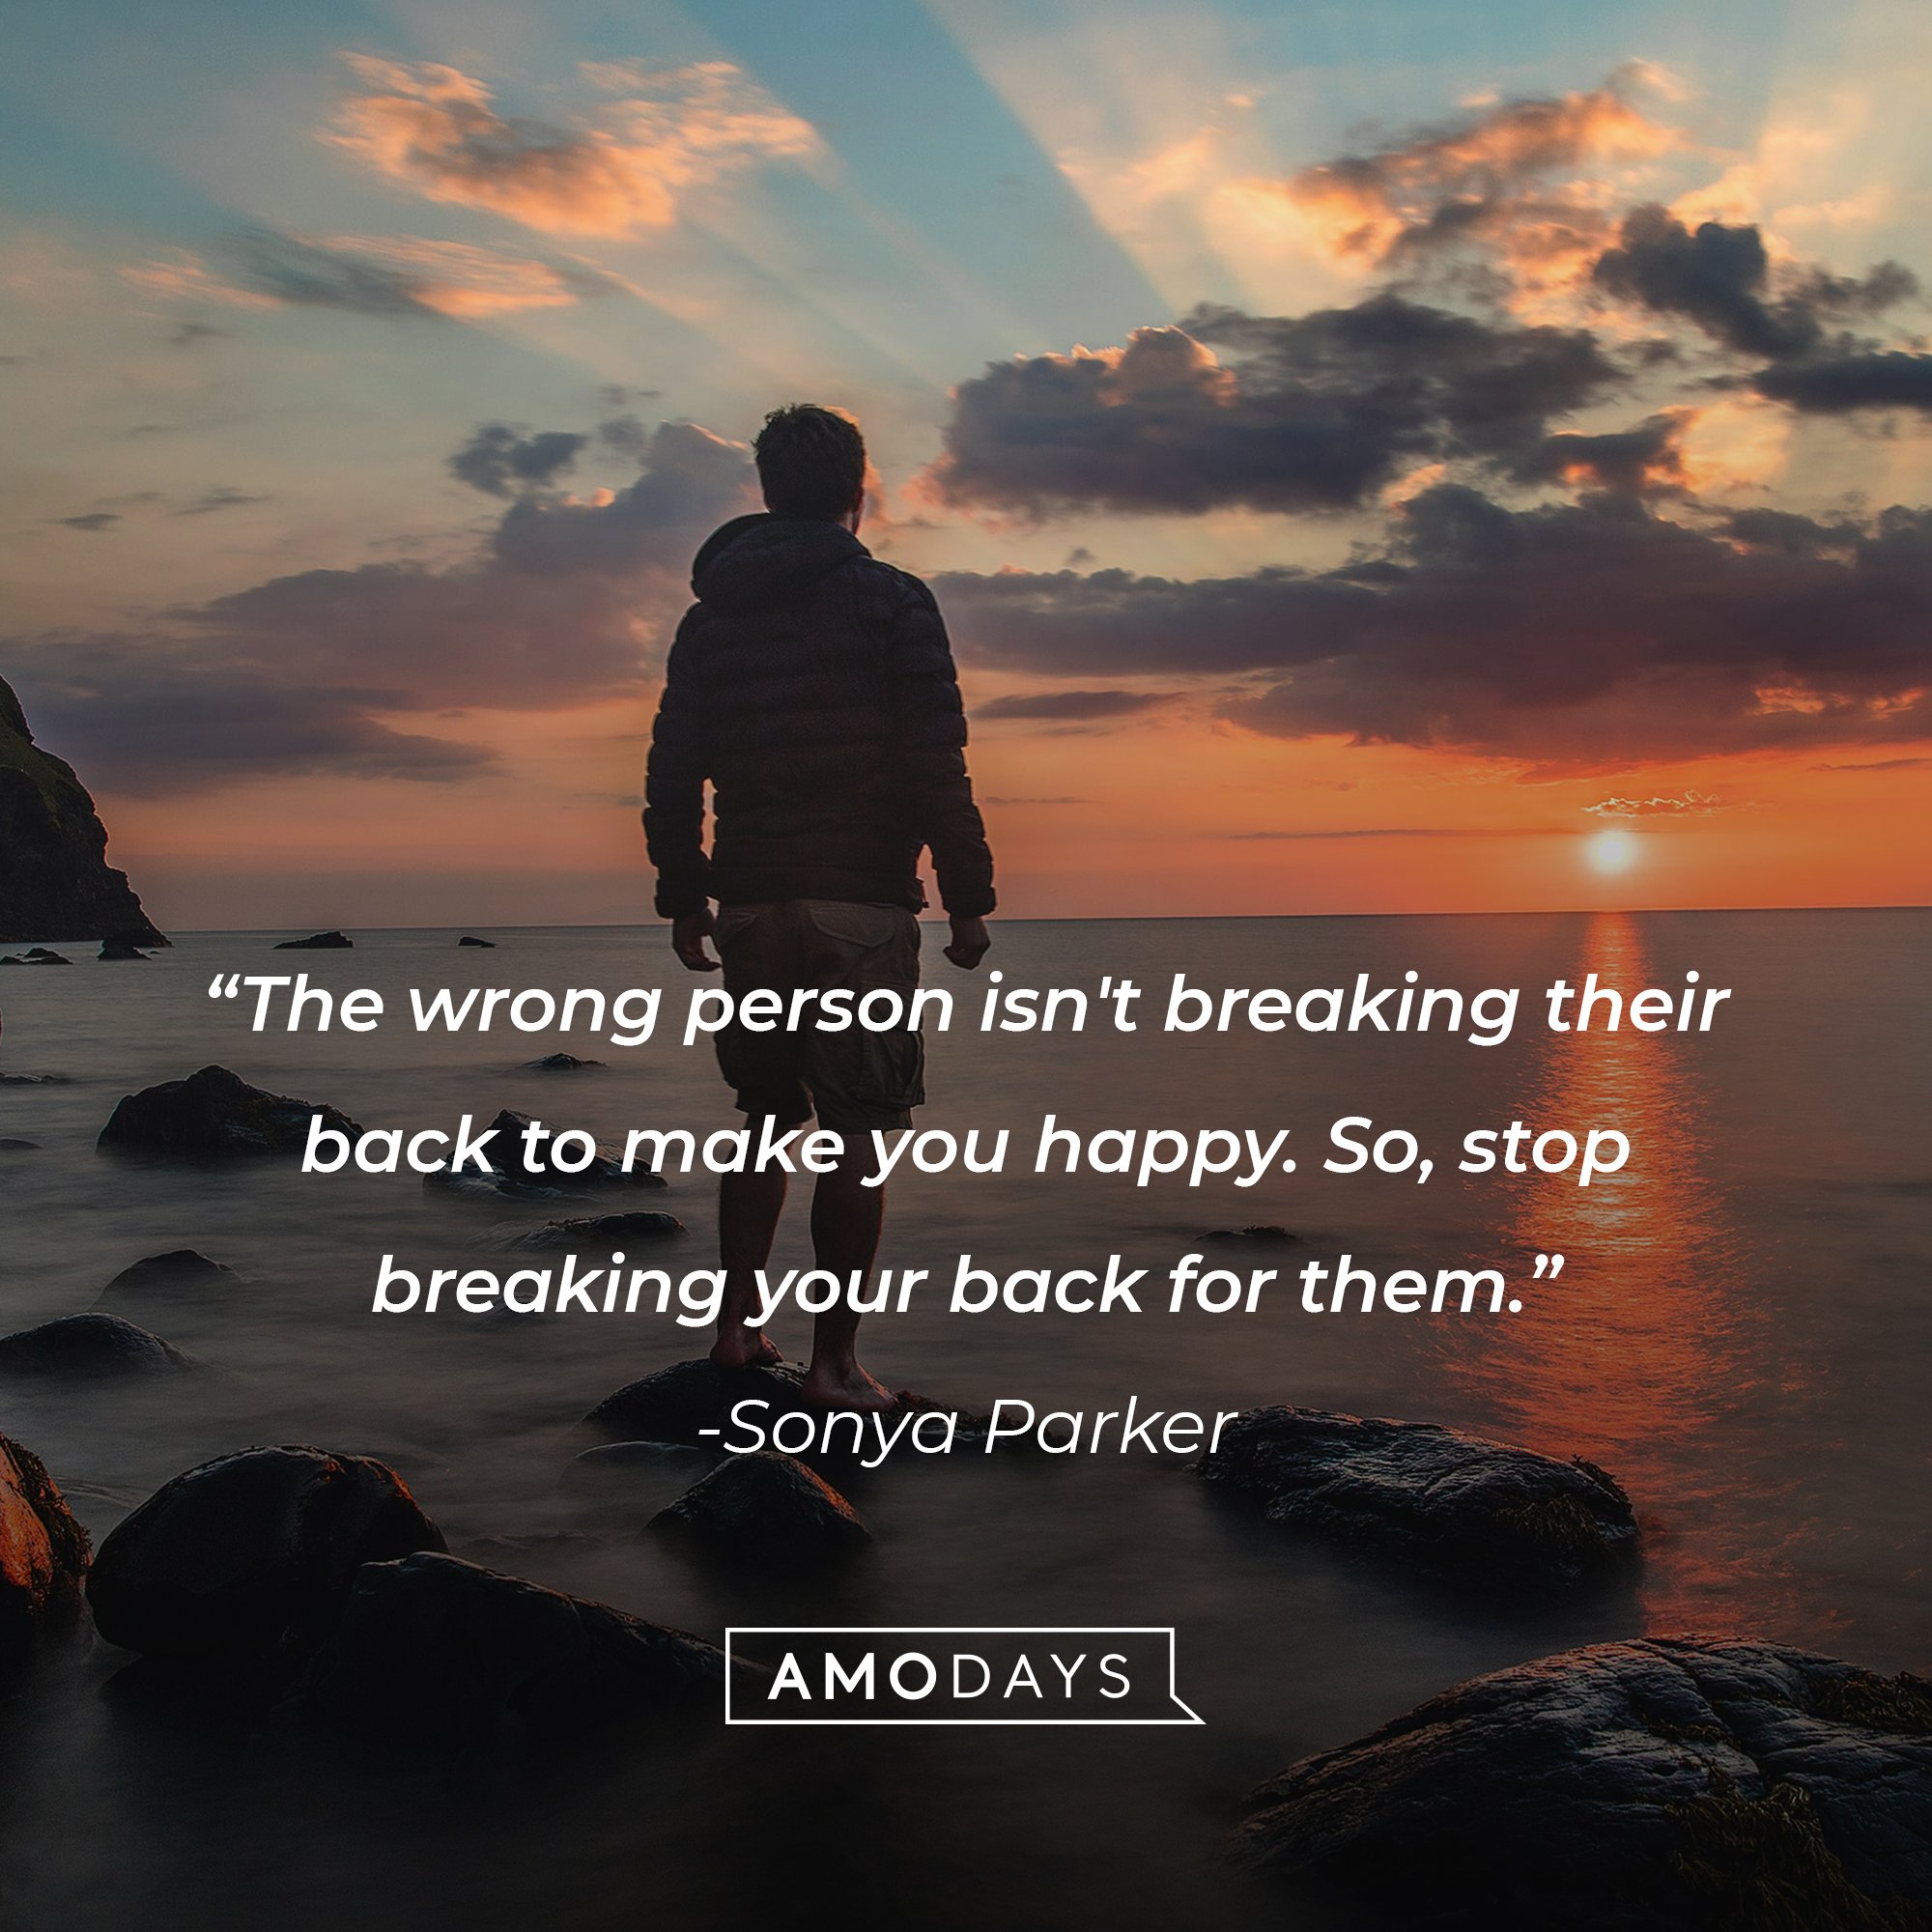 Sonya Parker’s quote: "The wrong person isn't breaking their back to make you happy. So, stop breaking your back for them." | Image: AmoDays